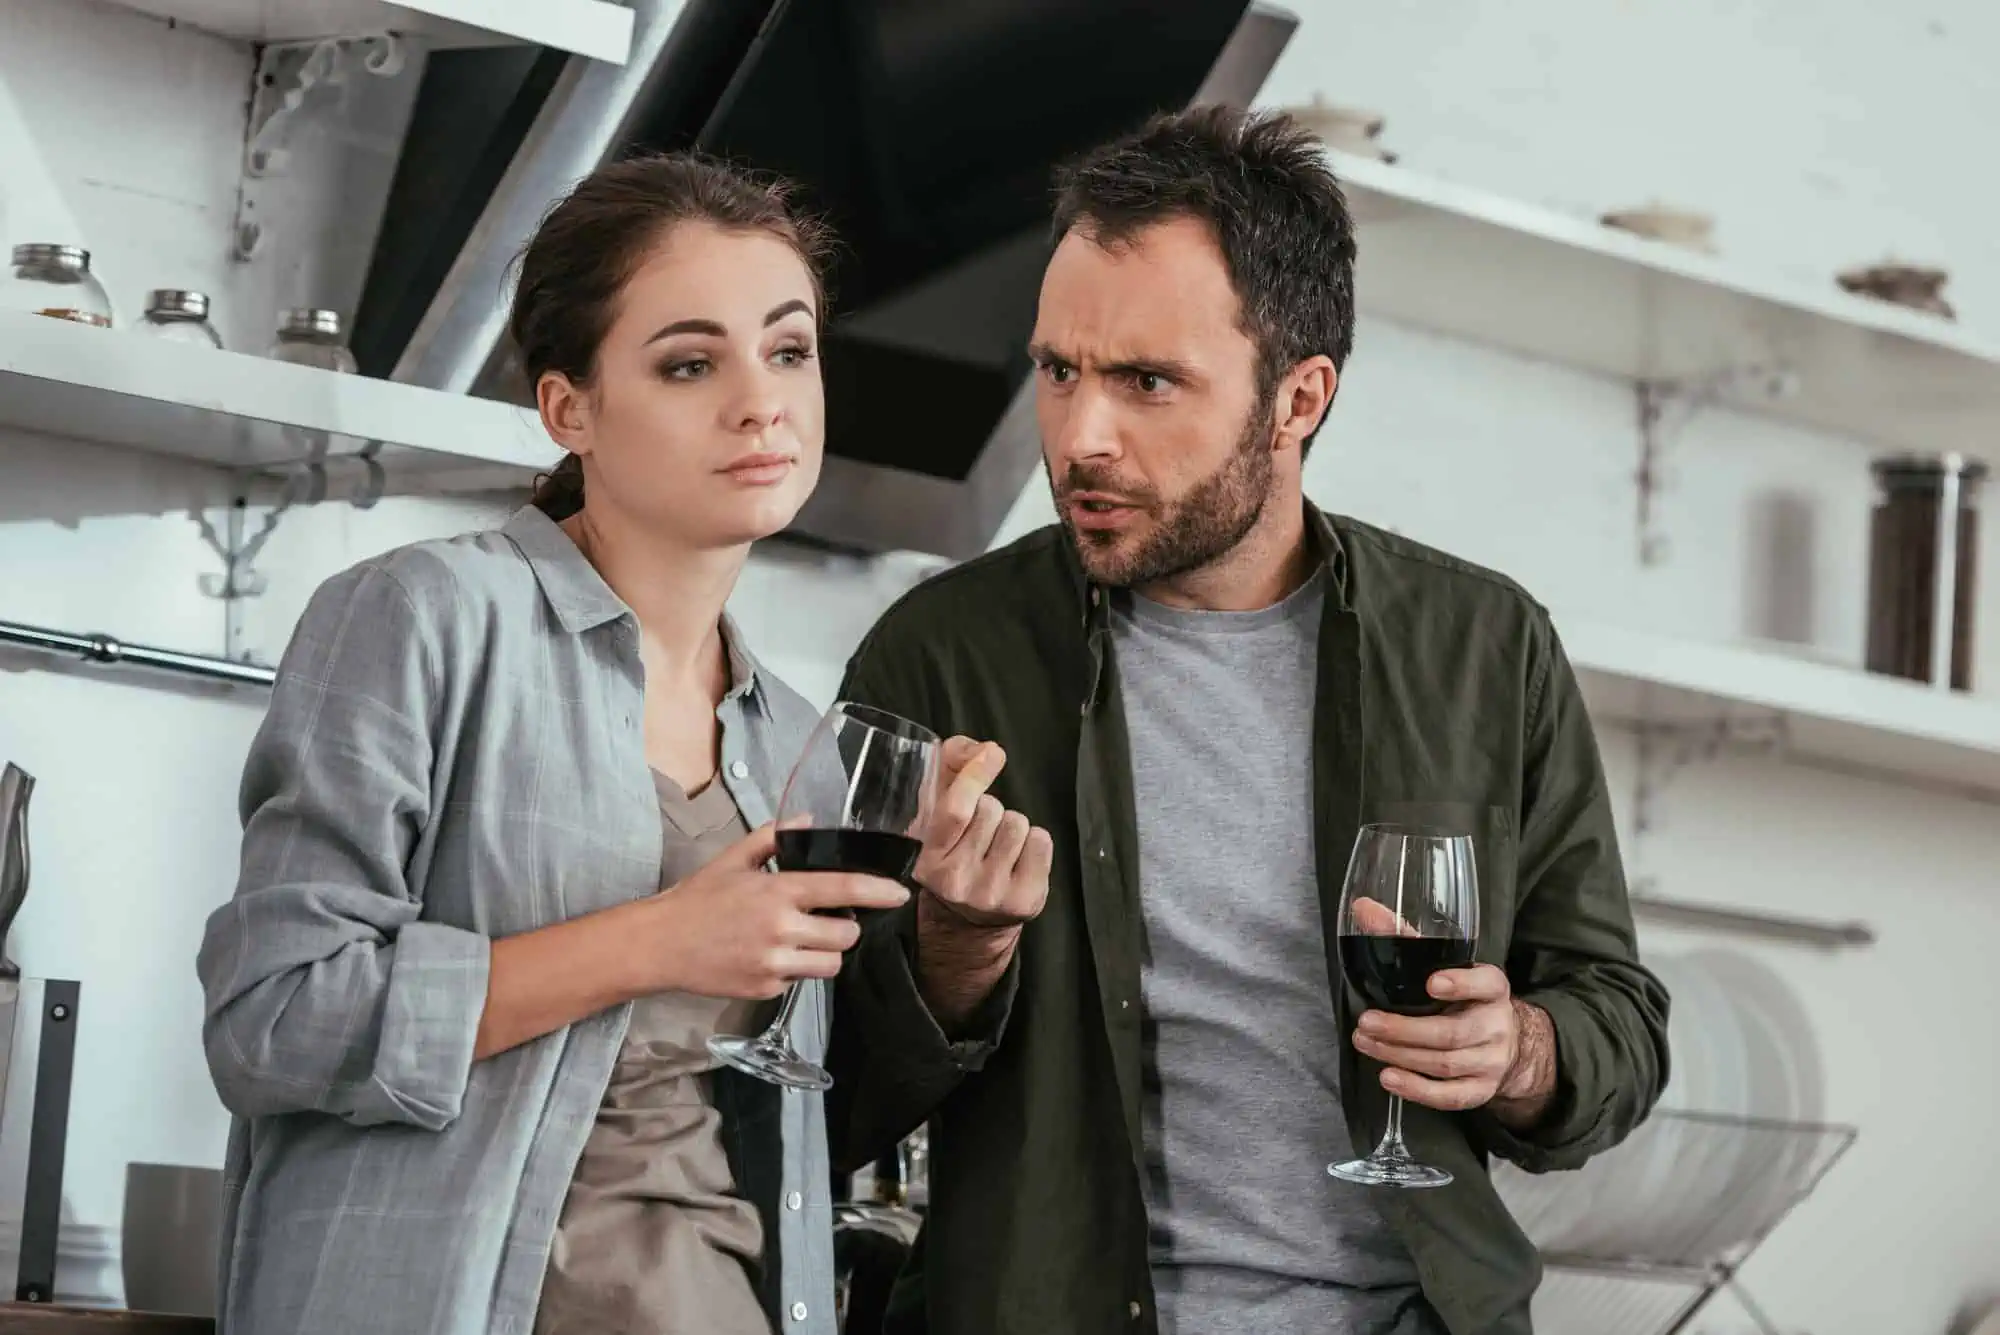 A man and a woman holding wine glasses